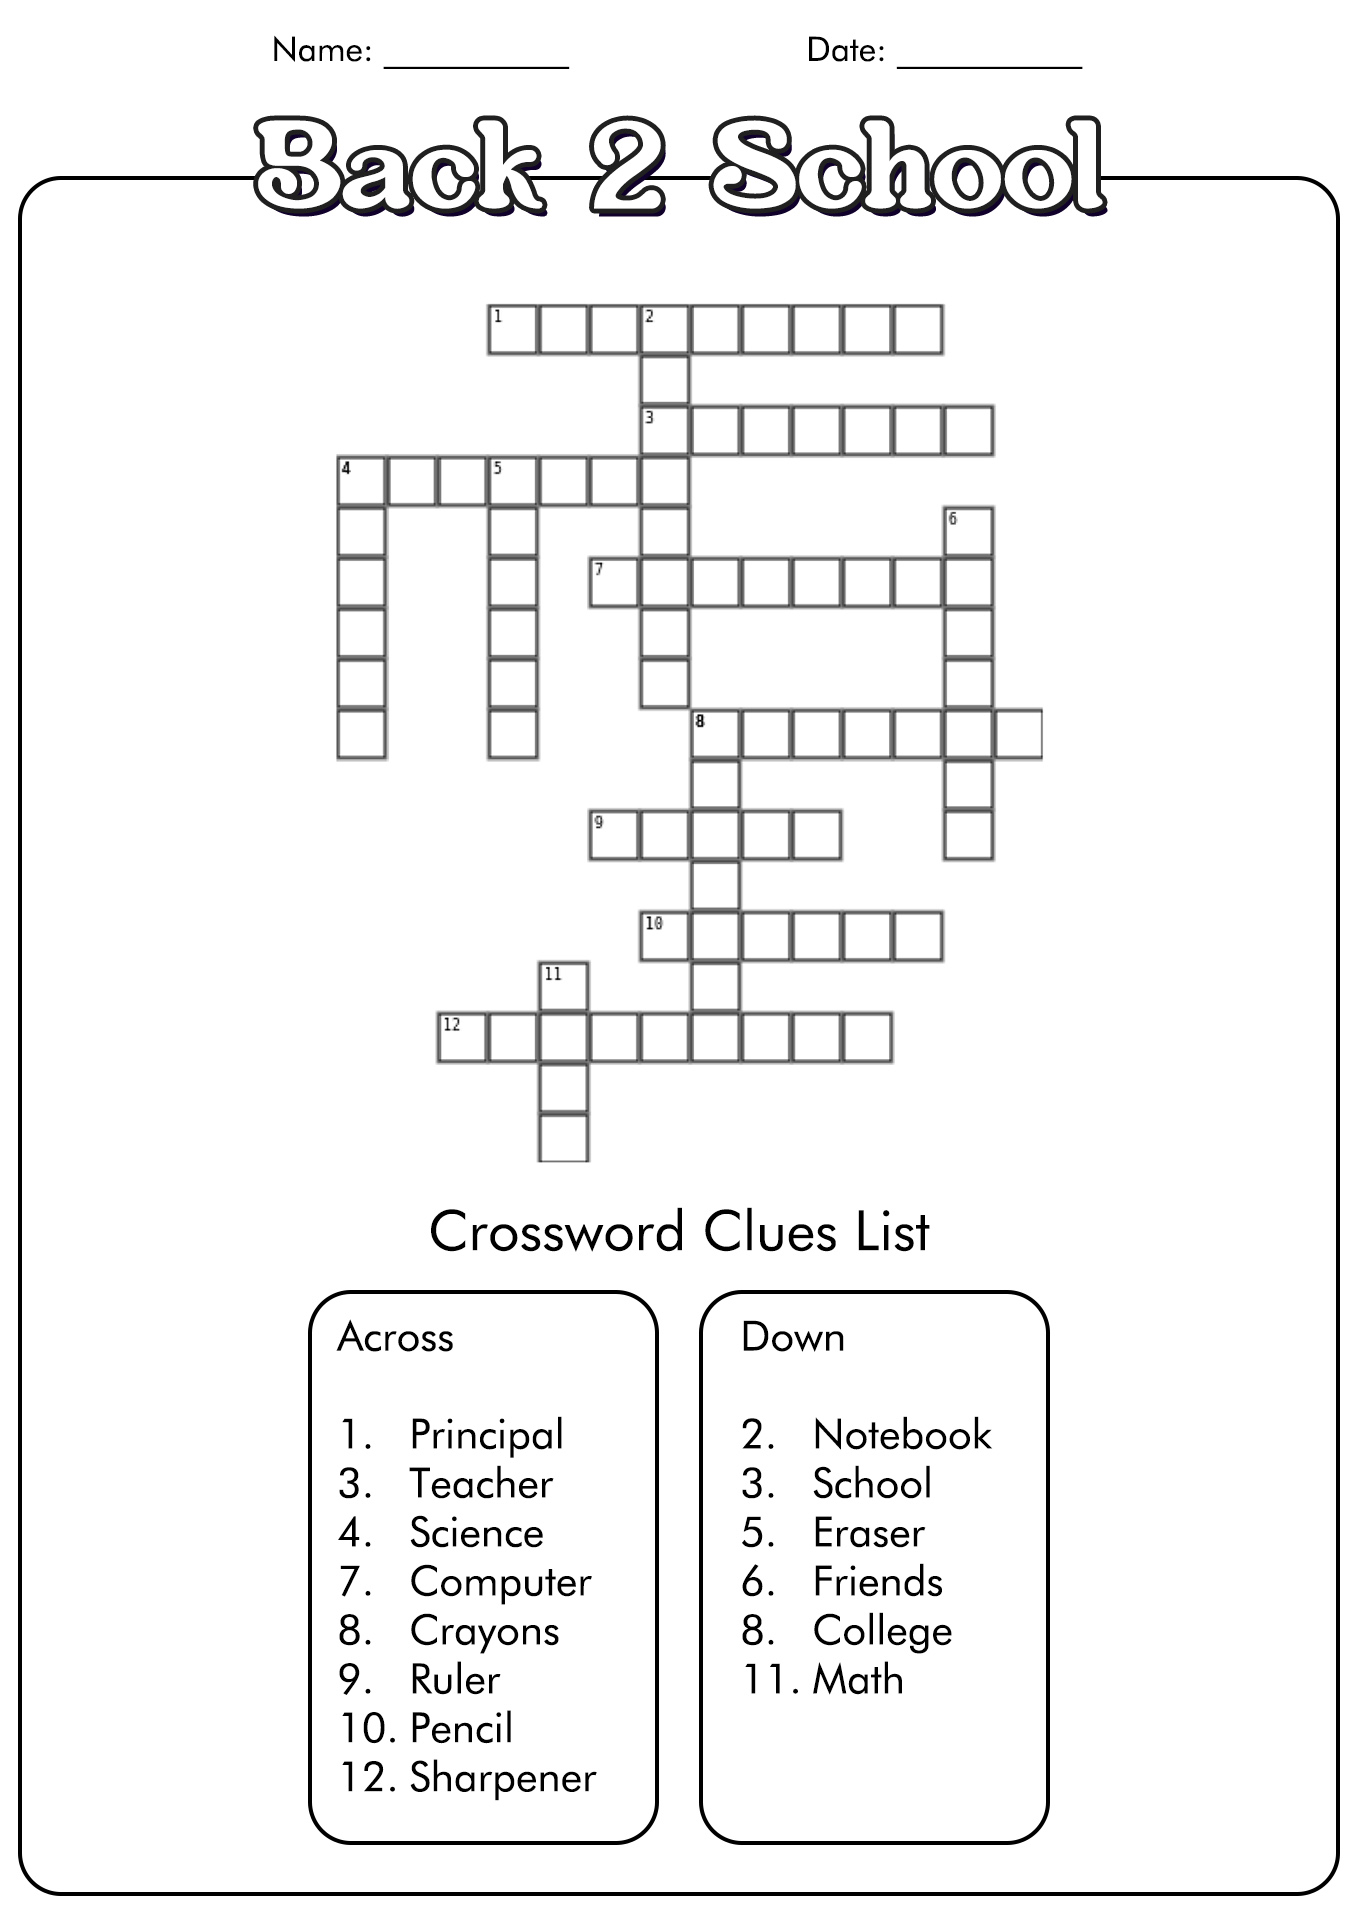 Back to School Crossword Puzzle Worksheets Image